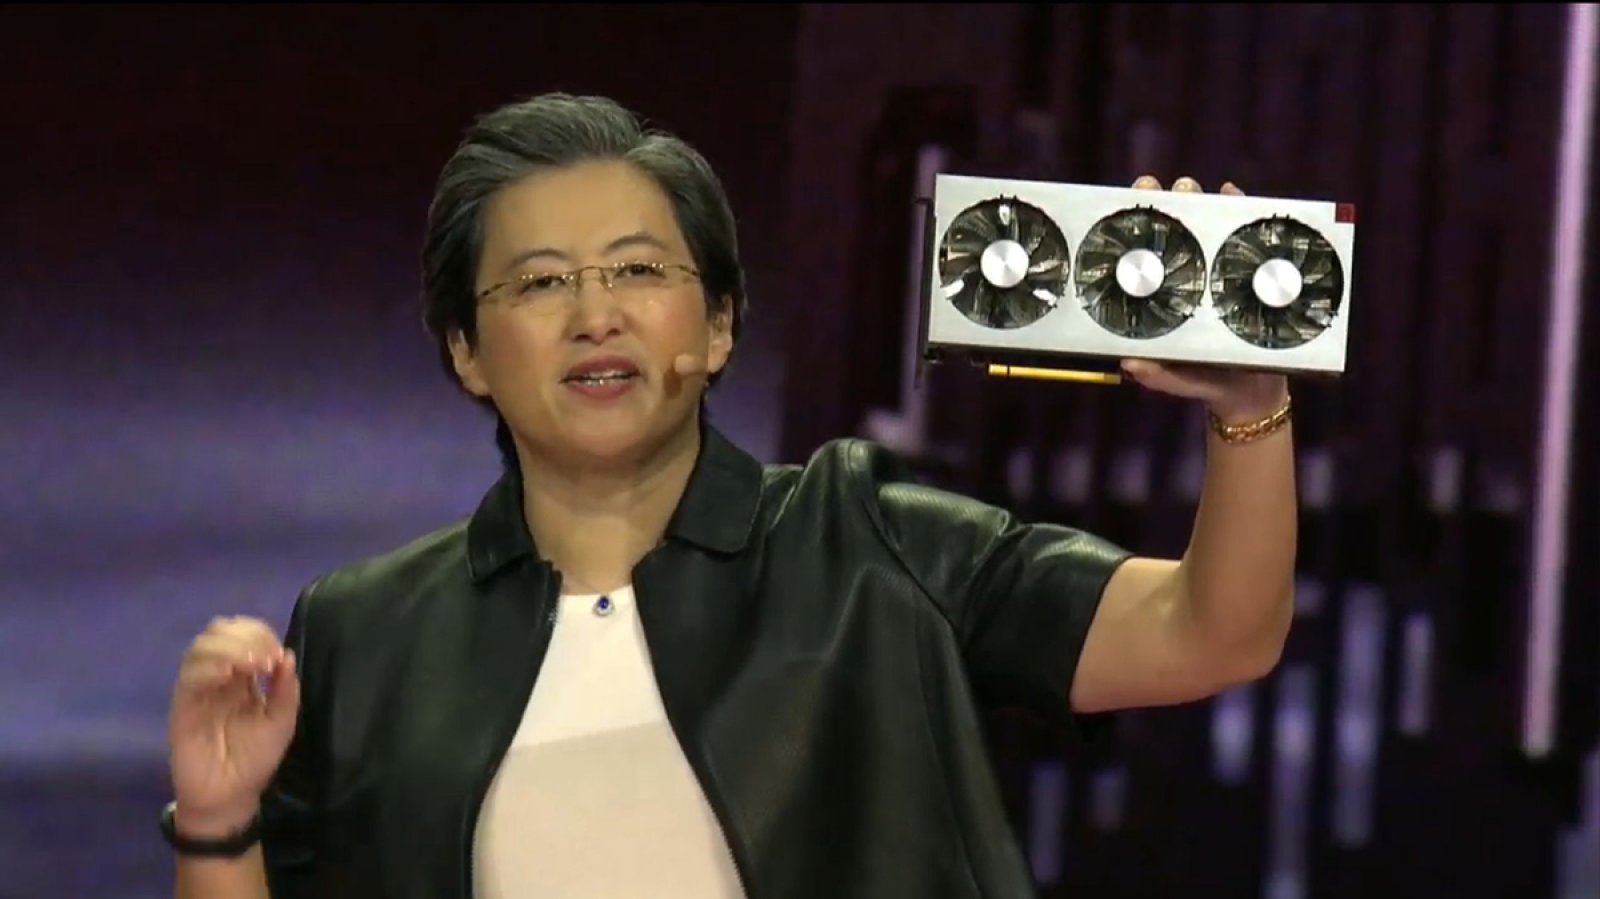 #CES | AMD introduced its new flagship graphics card and processors Ryzen 3rd generation